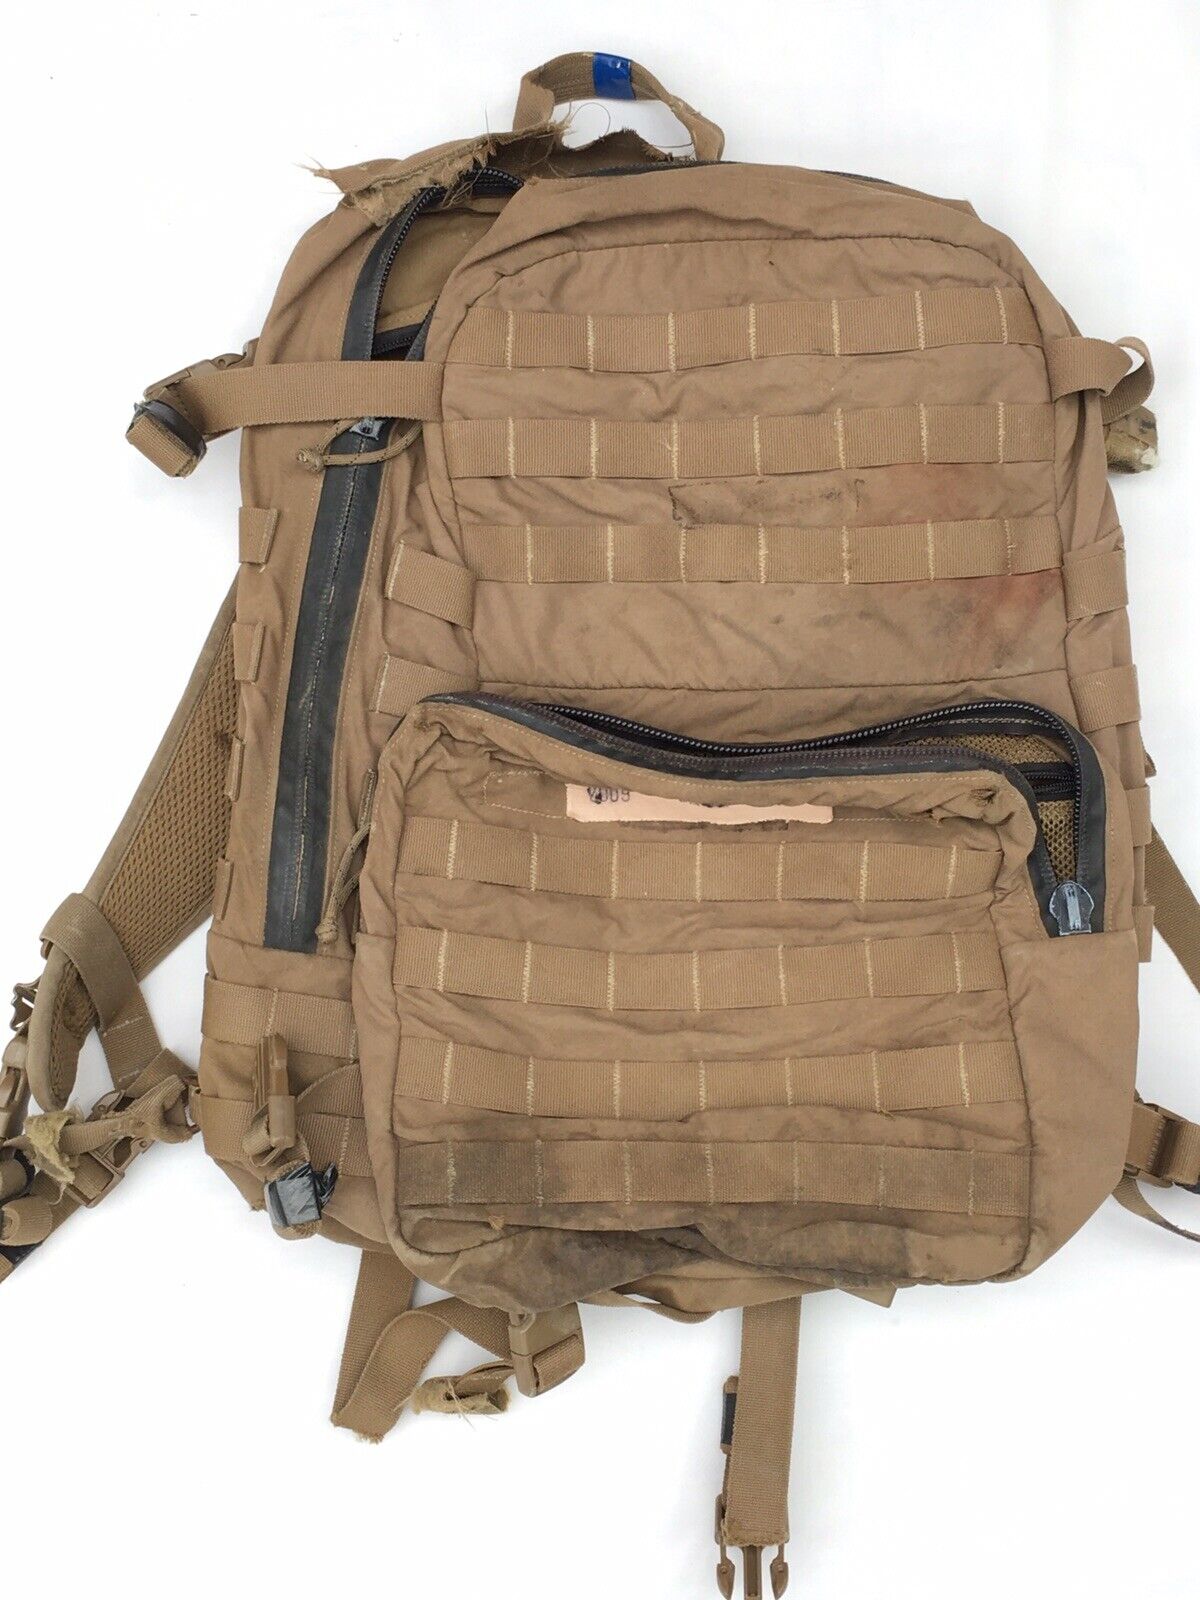 USMC FILBE ASSAULT PACK USGI 3 DAY SYSTEM COYOTE Bugout CIF Turn in/FAIR/DAMAGE